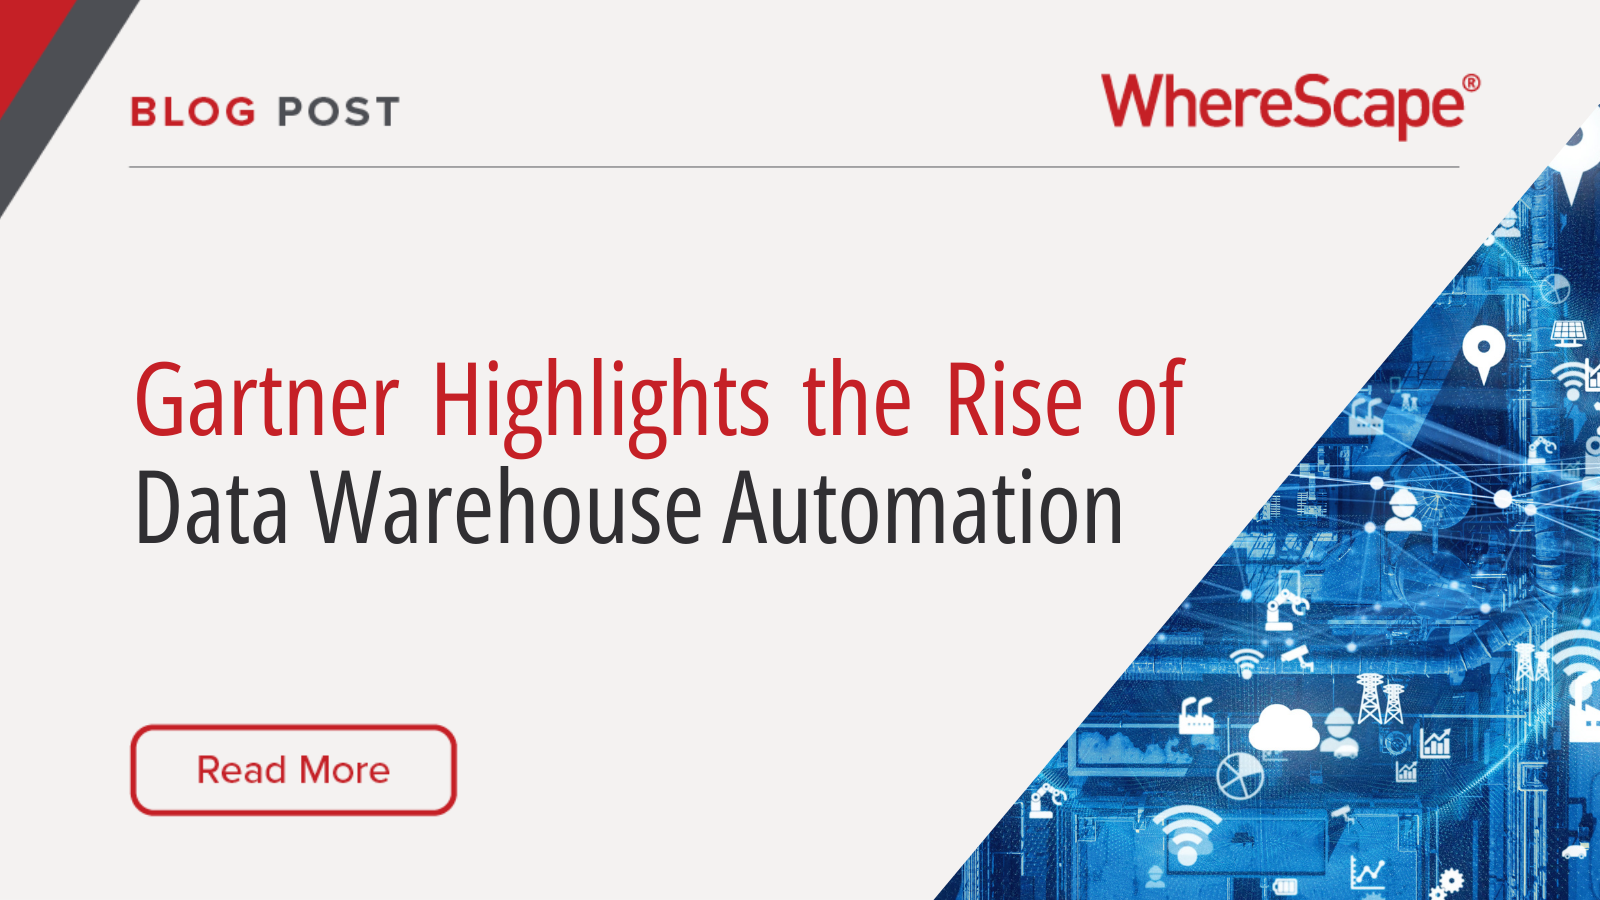 Gartner Highlights the Rise of Data Warehouse Automation